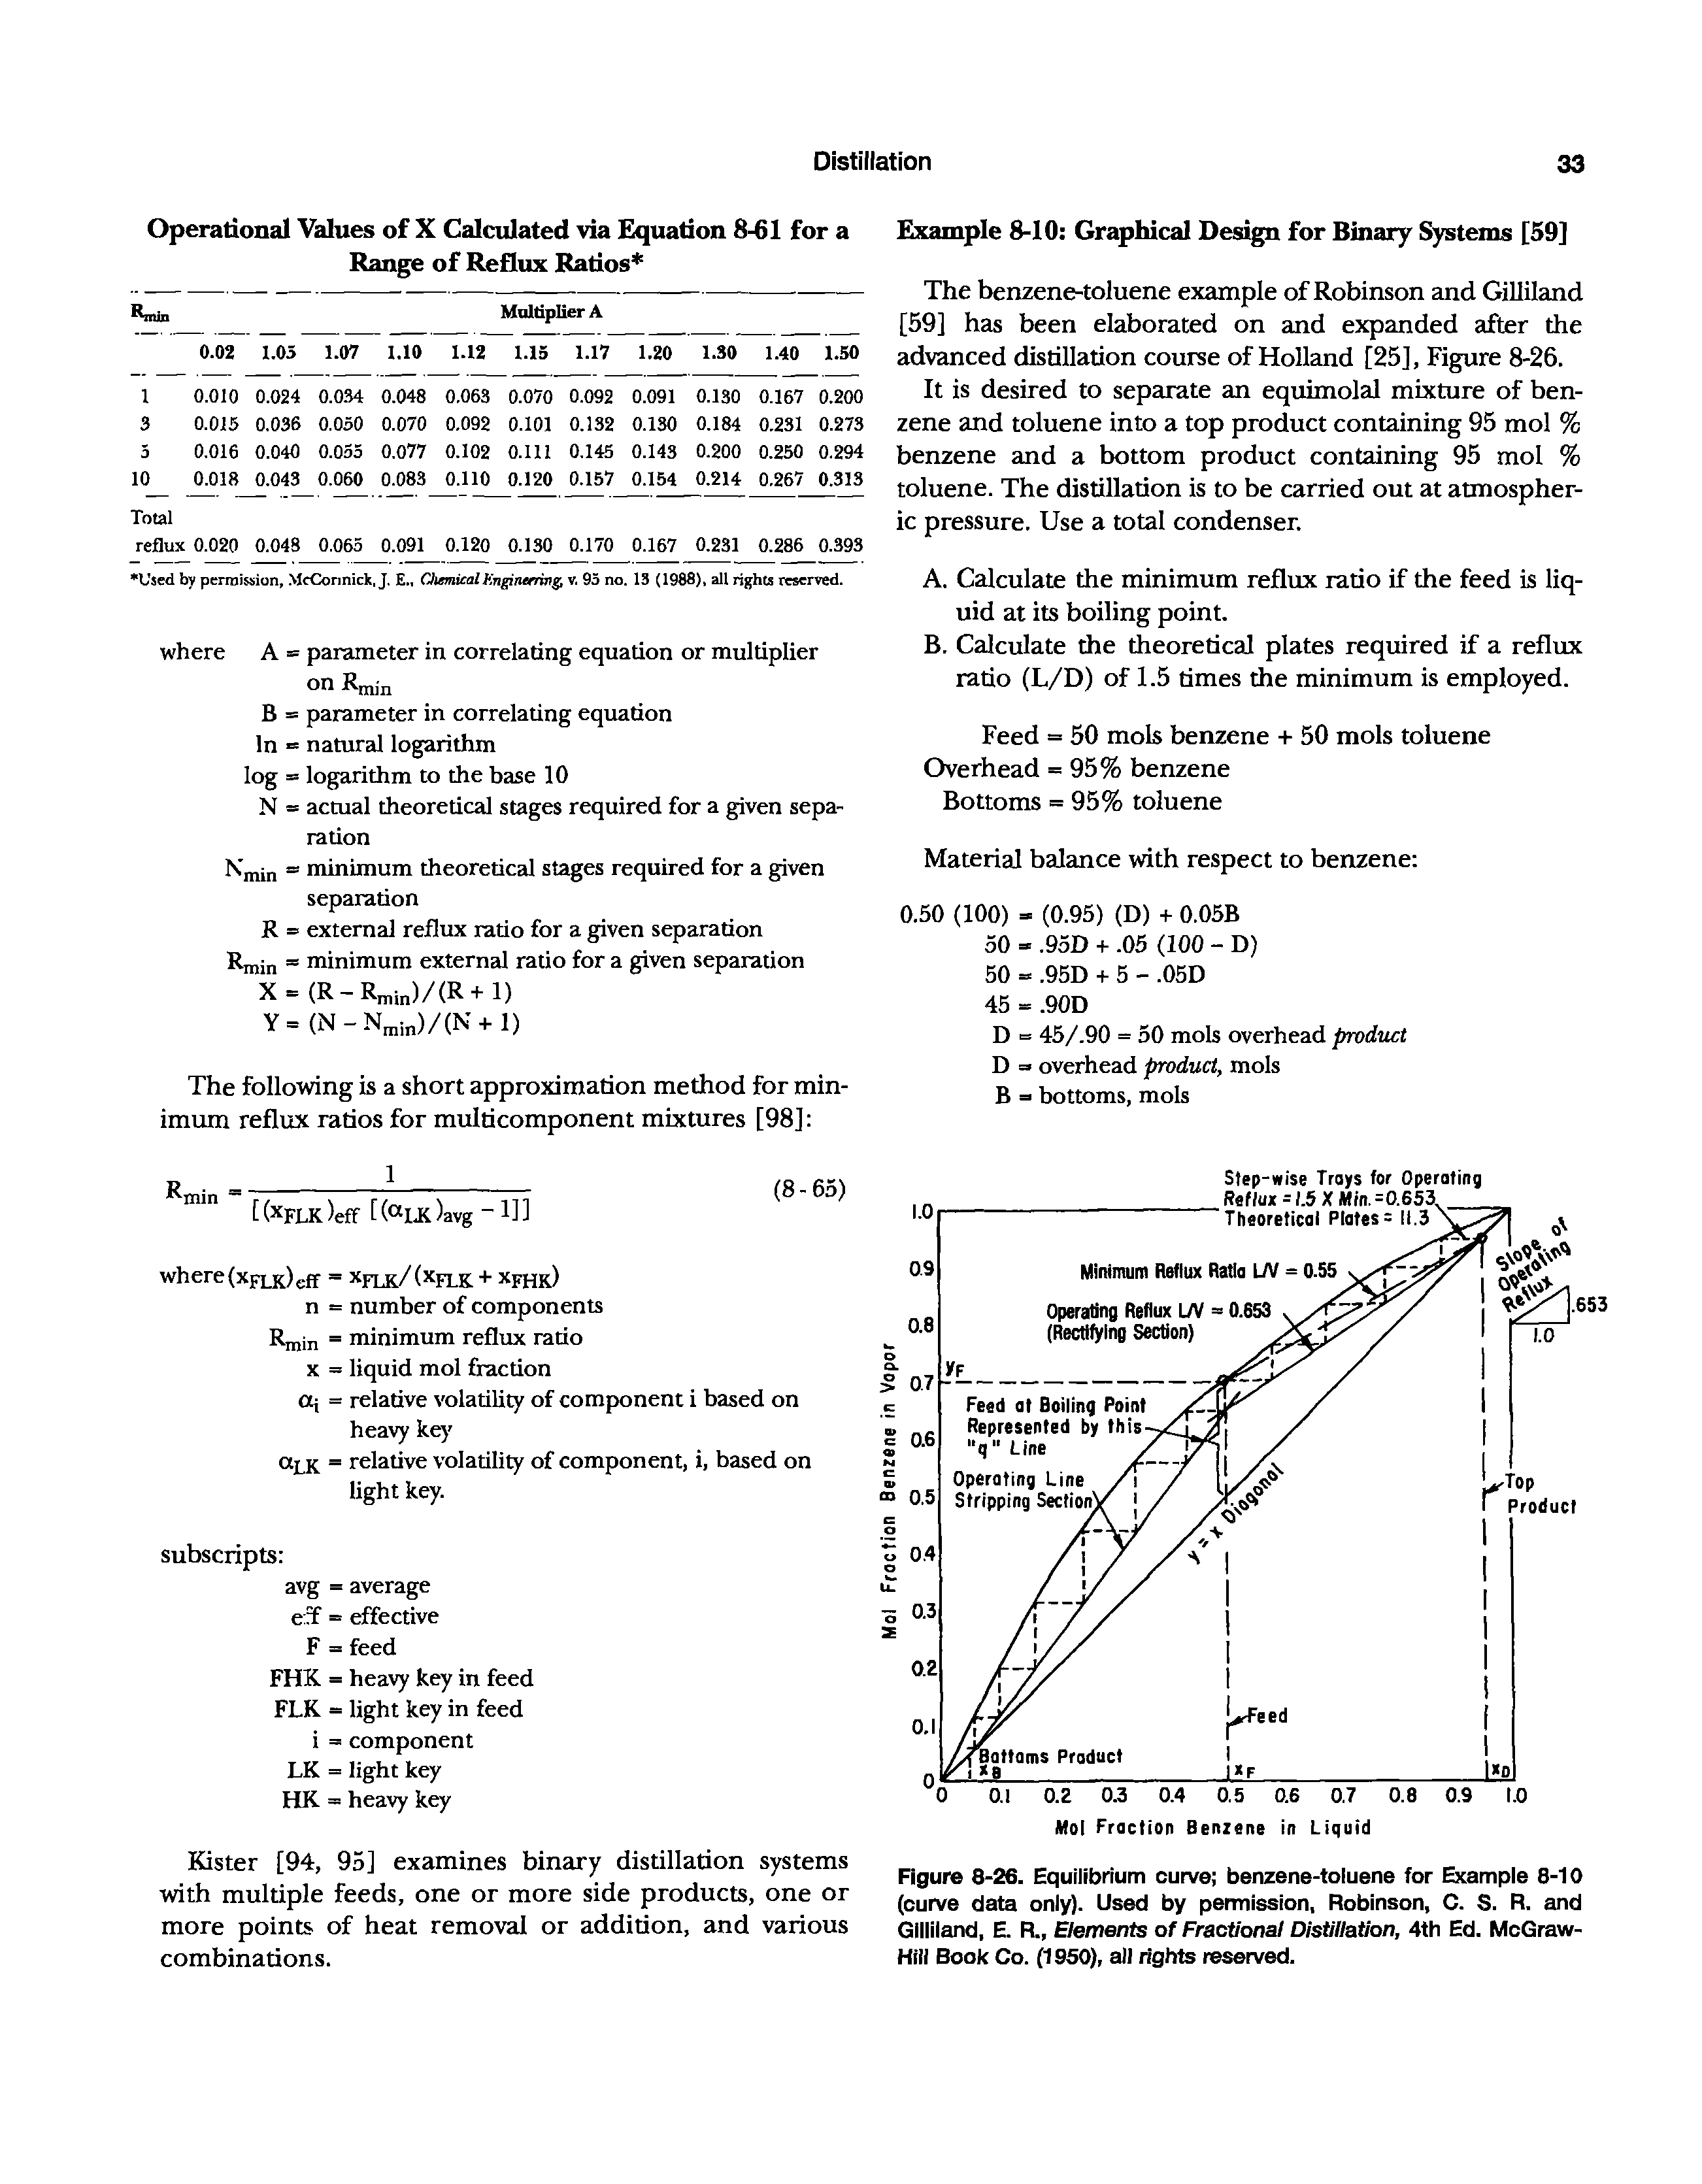 Figure 8-26. Equilibrium curve benzene-toluene for Example 8-10 (curve data only). Used by permission, Robinson, C. S. R. and Gilliland, E. R., Elements of Fractional Distillation, 4th Ed. McGraw-Hill Book Co. (1950), all rights reserved.